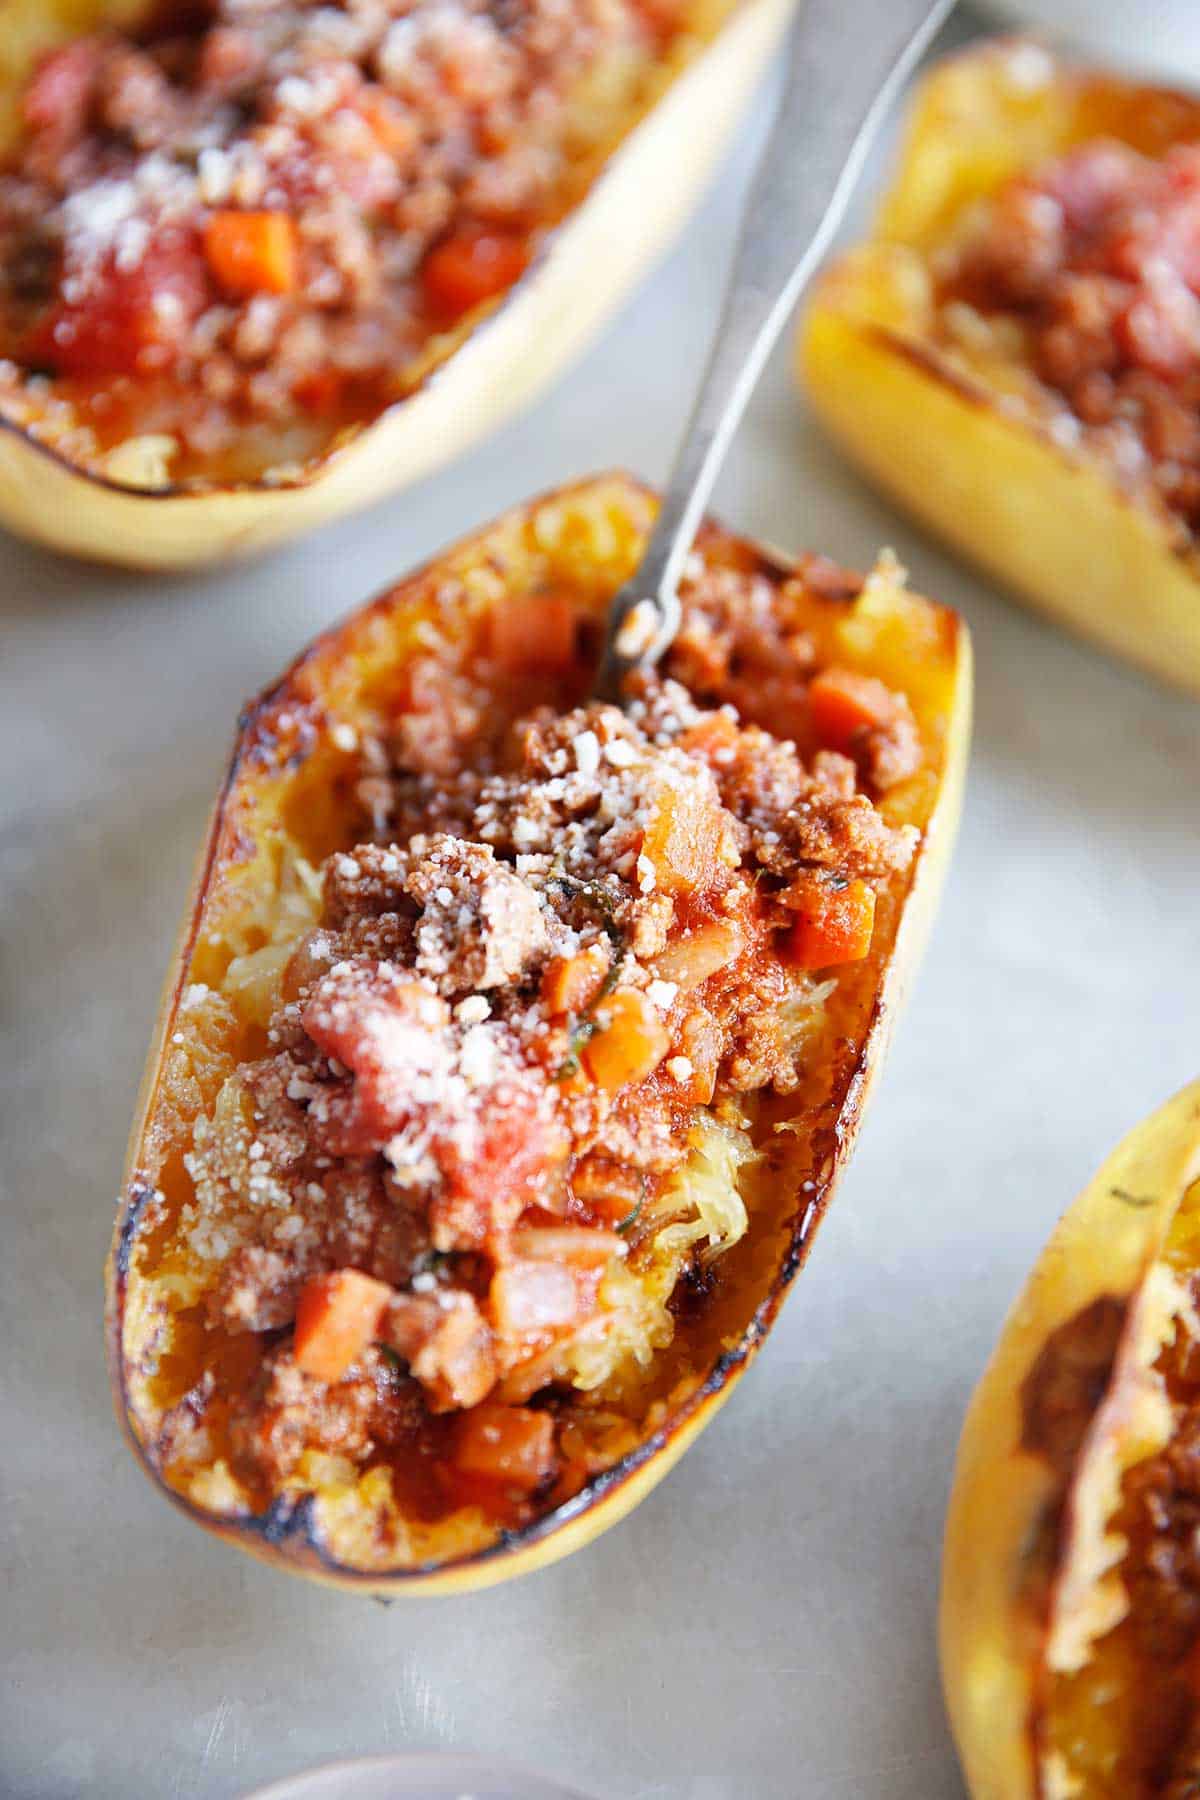 Spaghetti squash with homemade meat sauce.